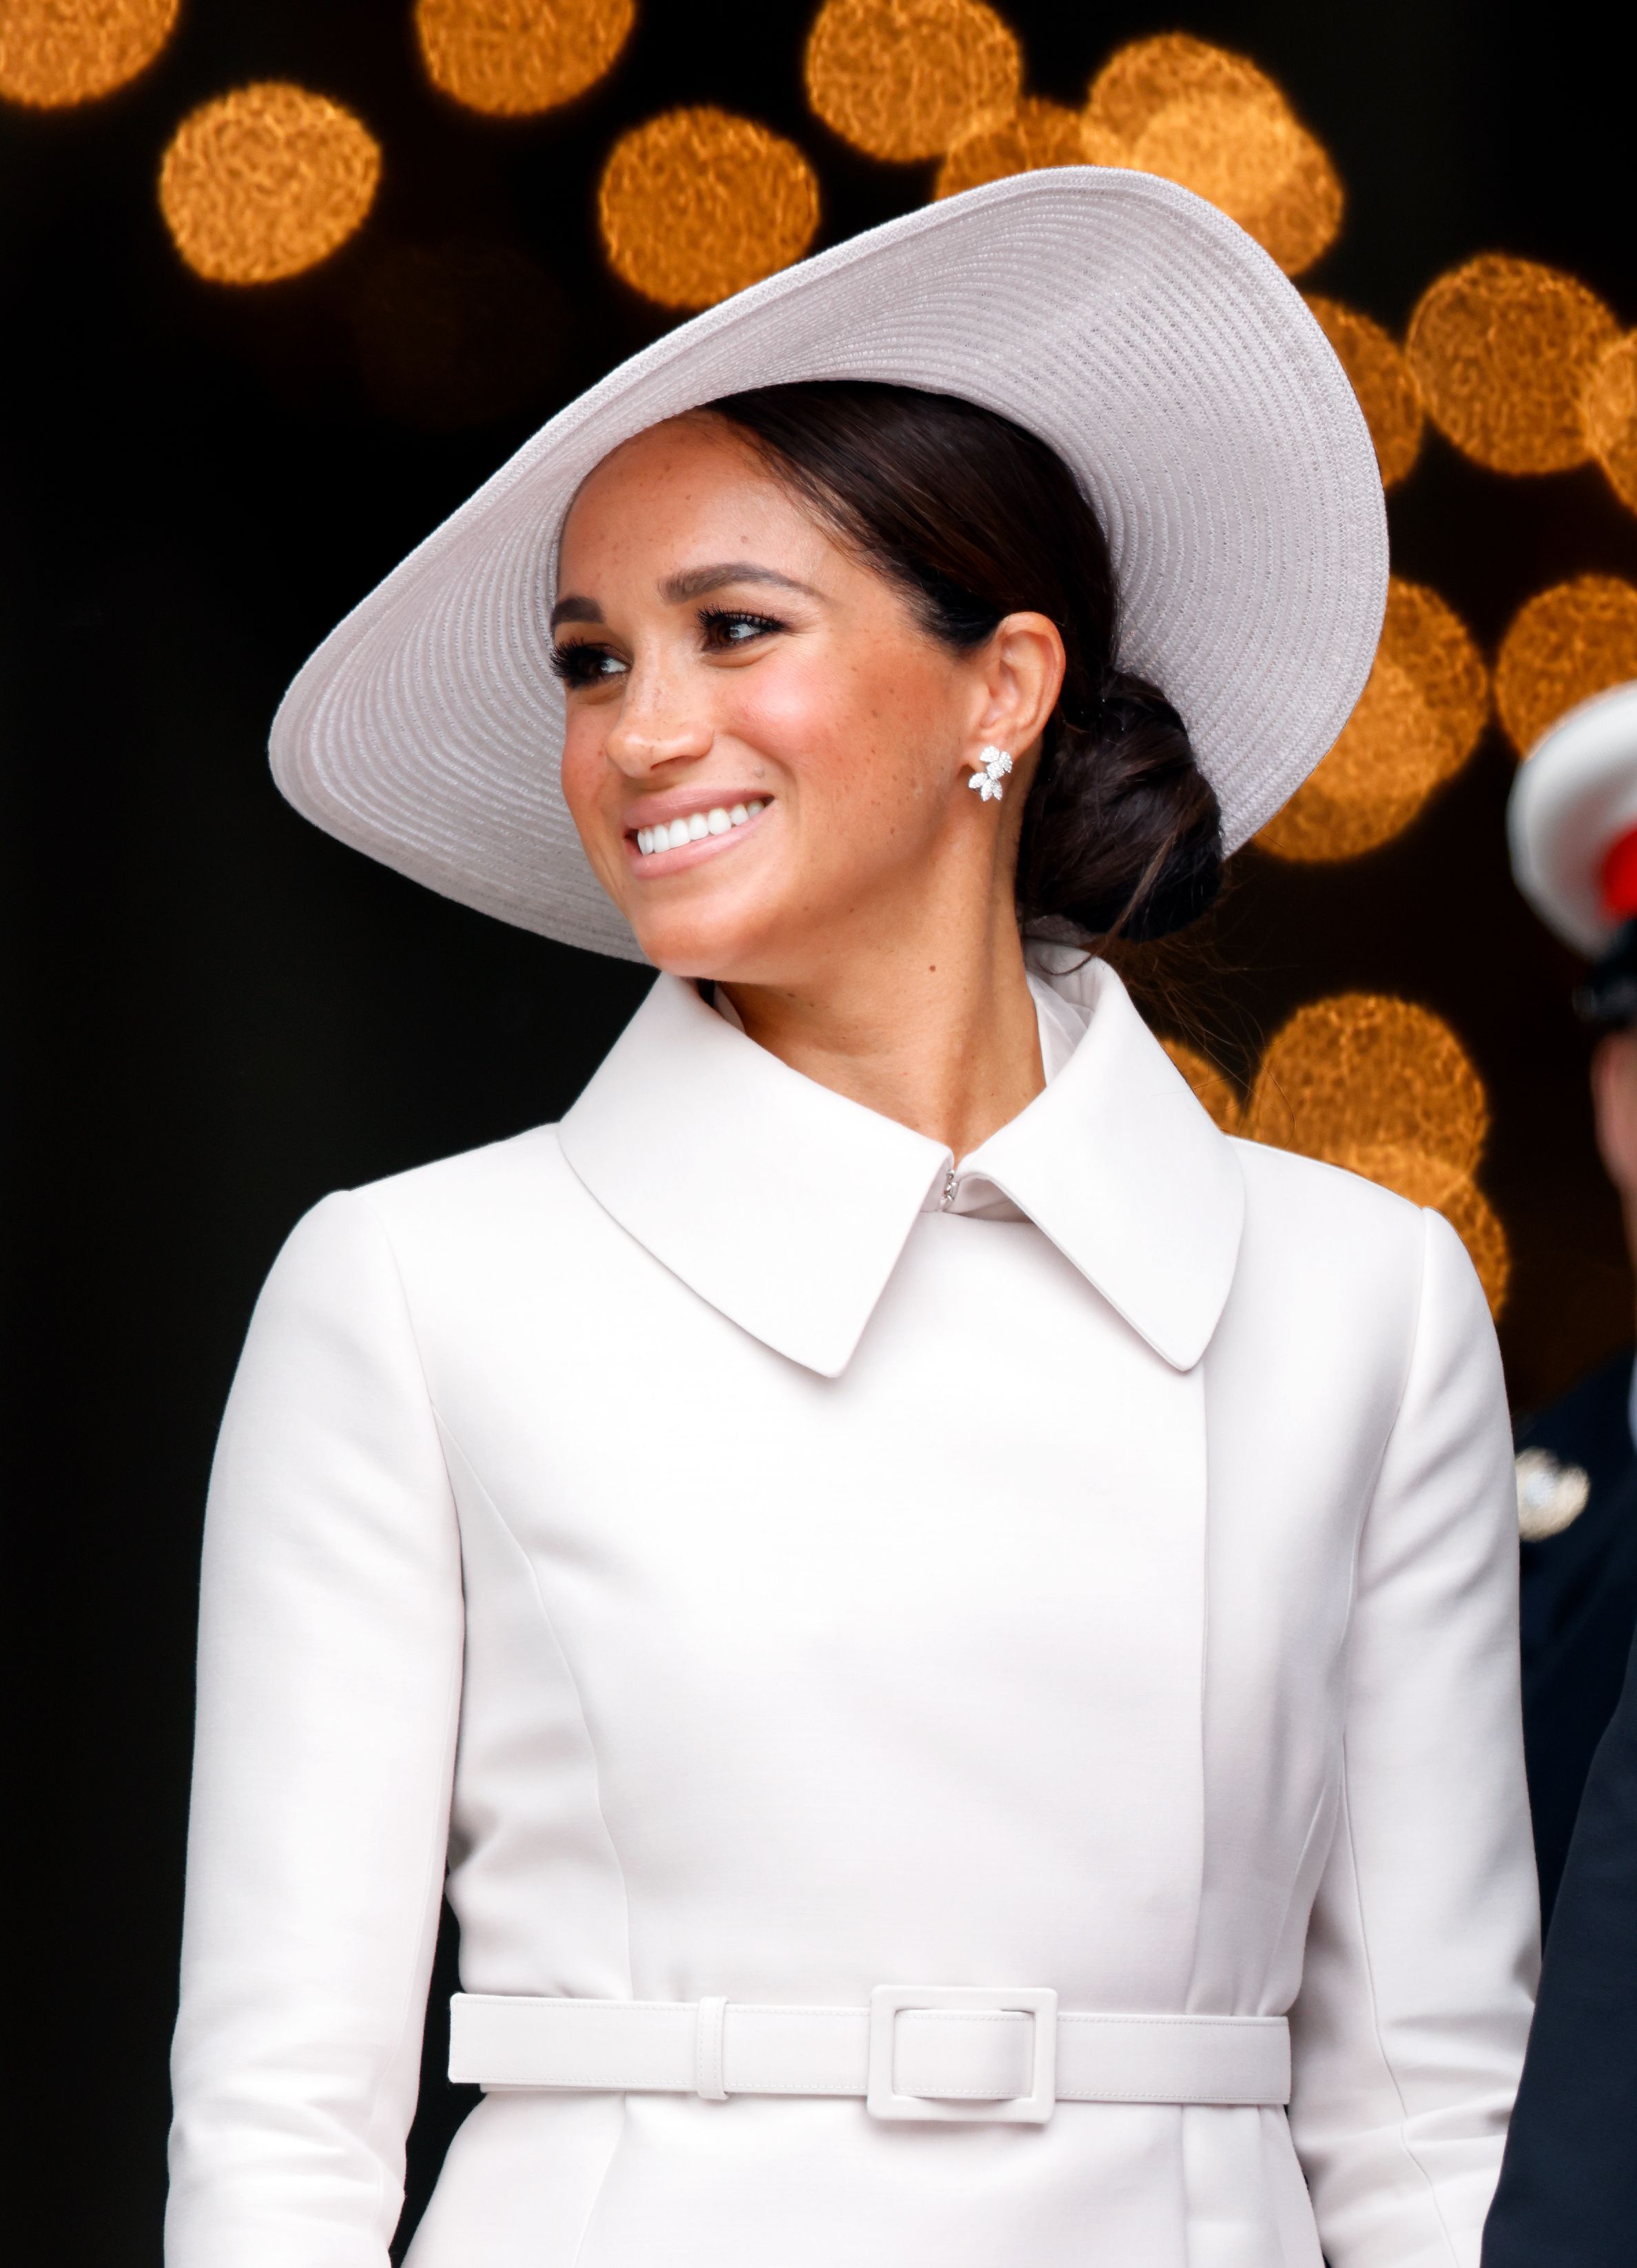 This Is Why Women In The Royal Family Always Wear Hats